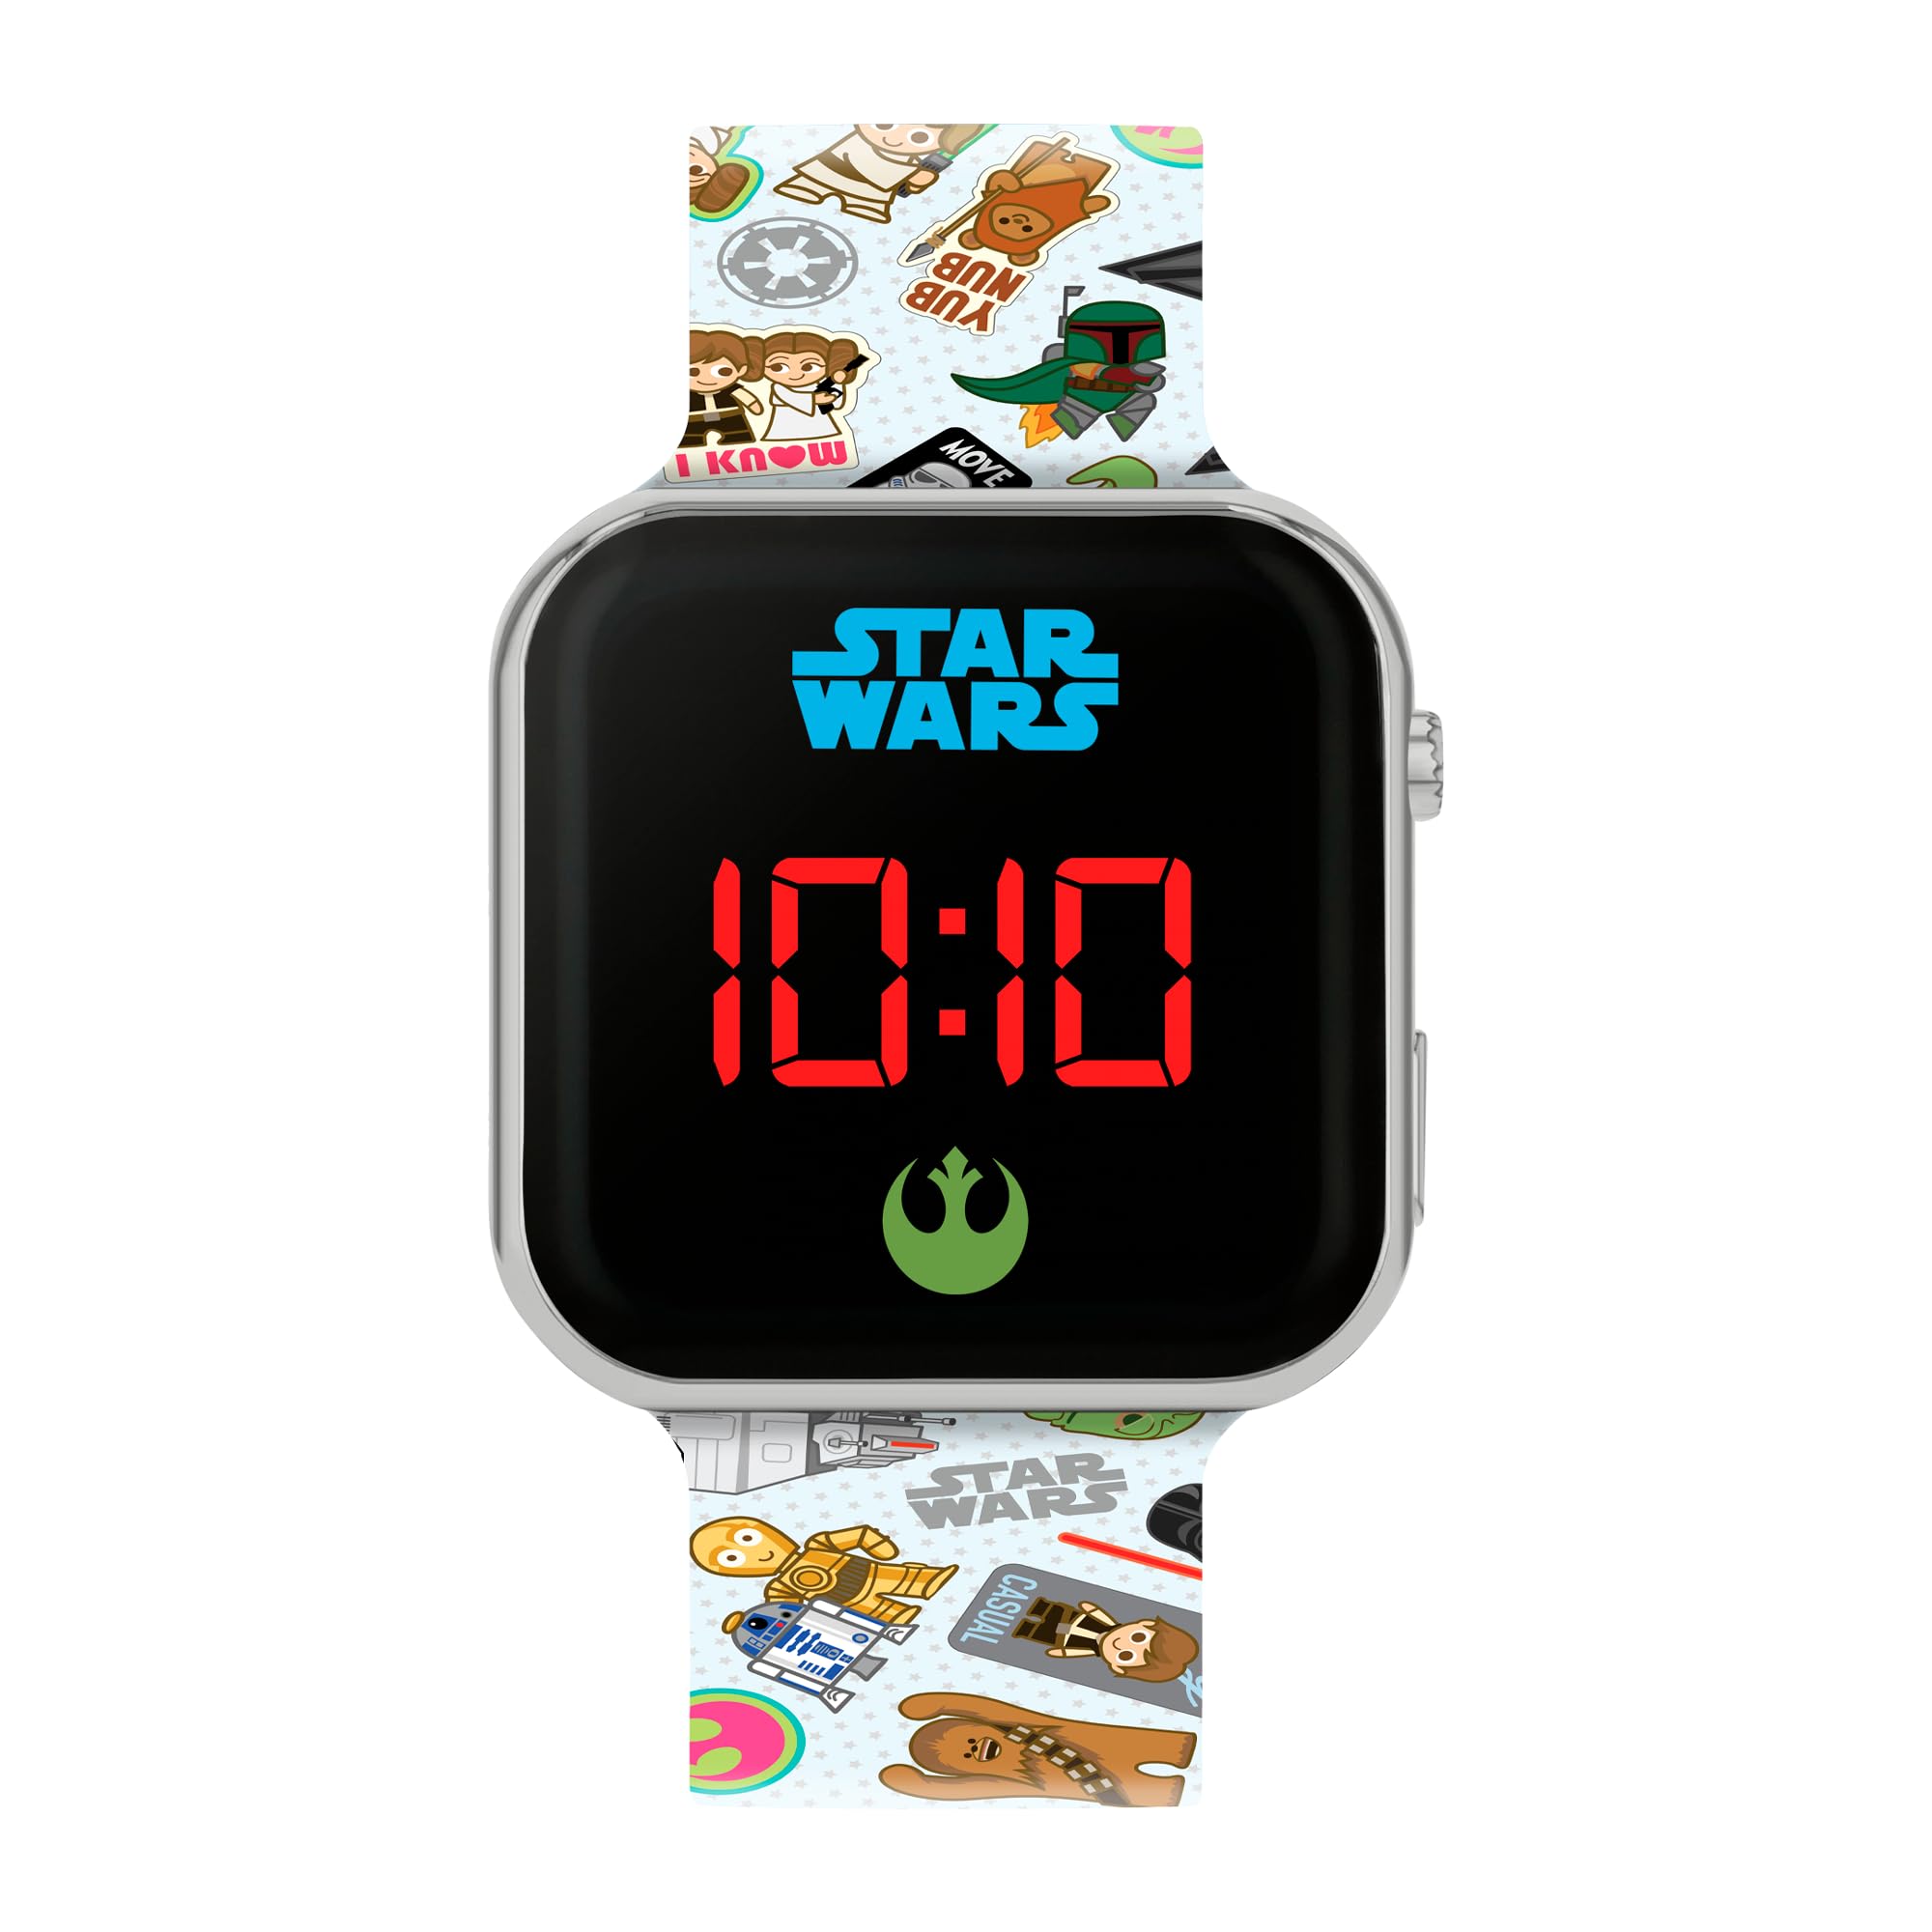 Star Wars LED Strap Watch STW4074, Multicolour, One Size